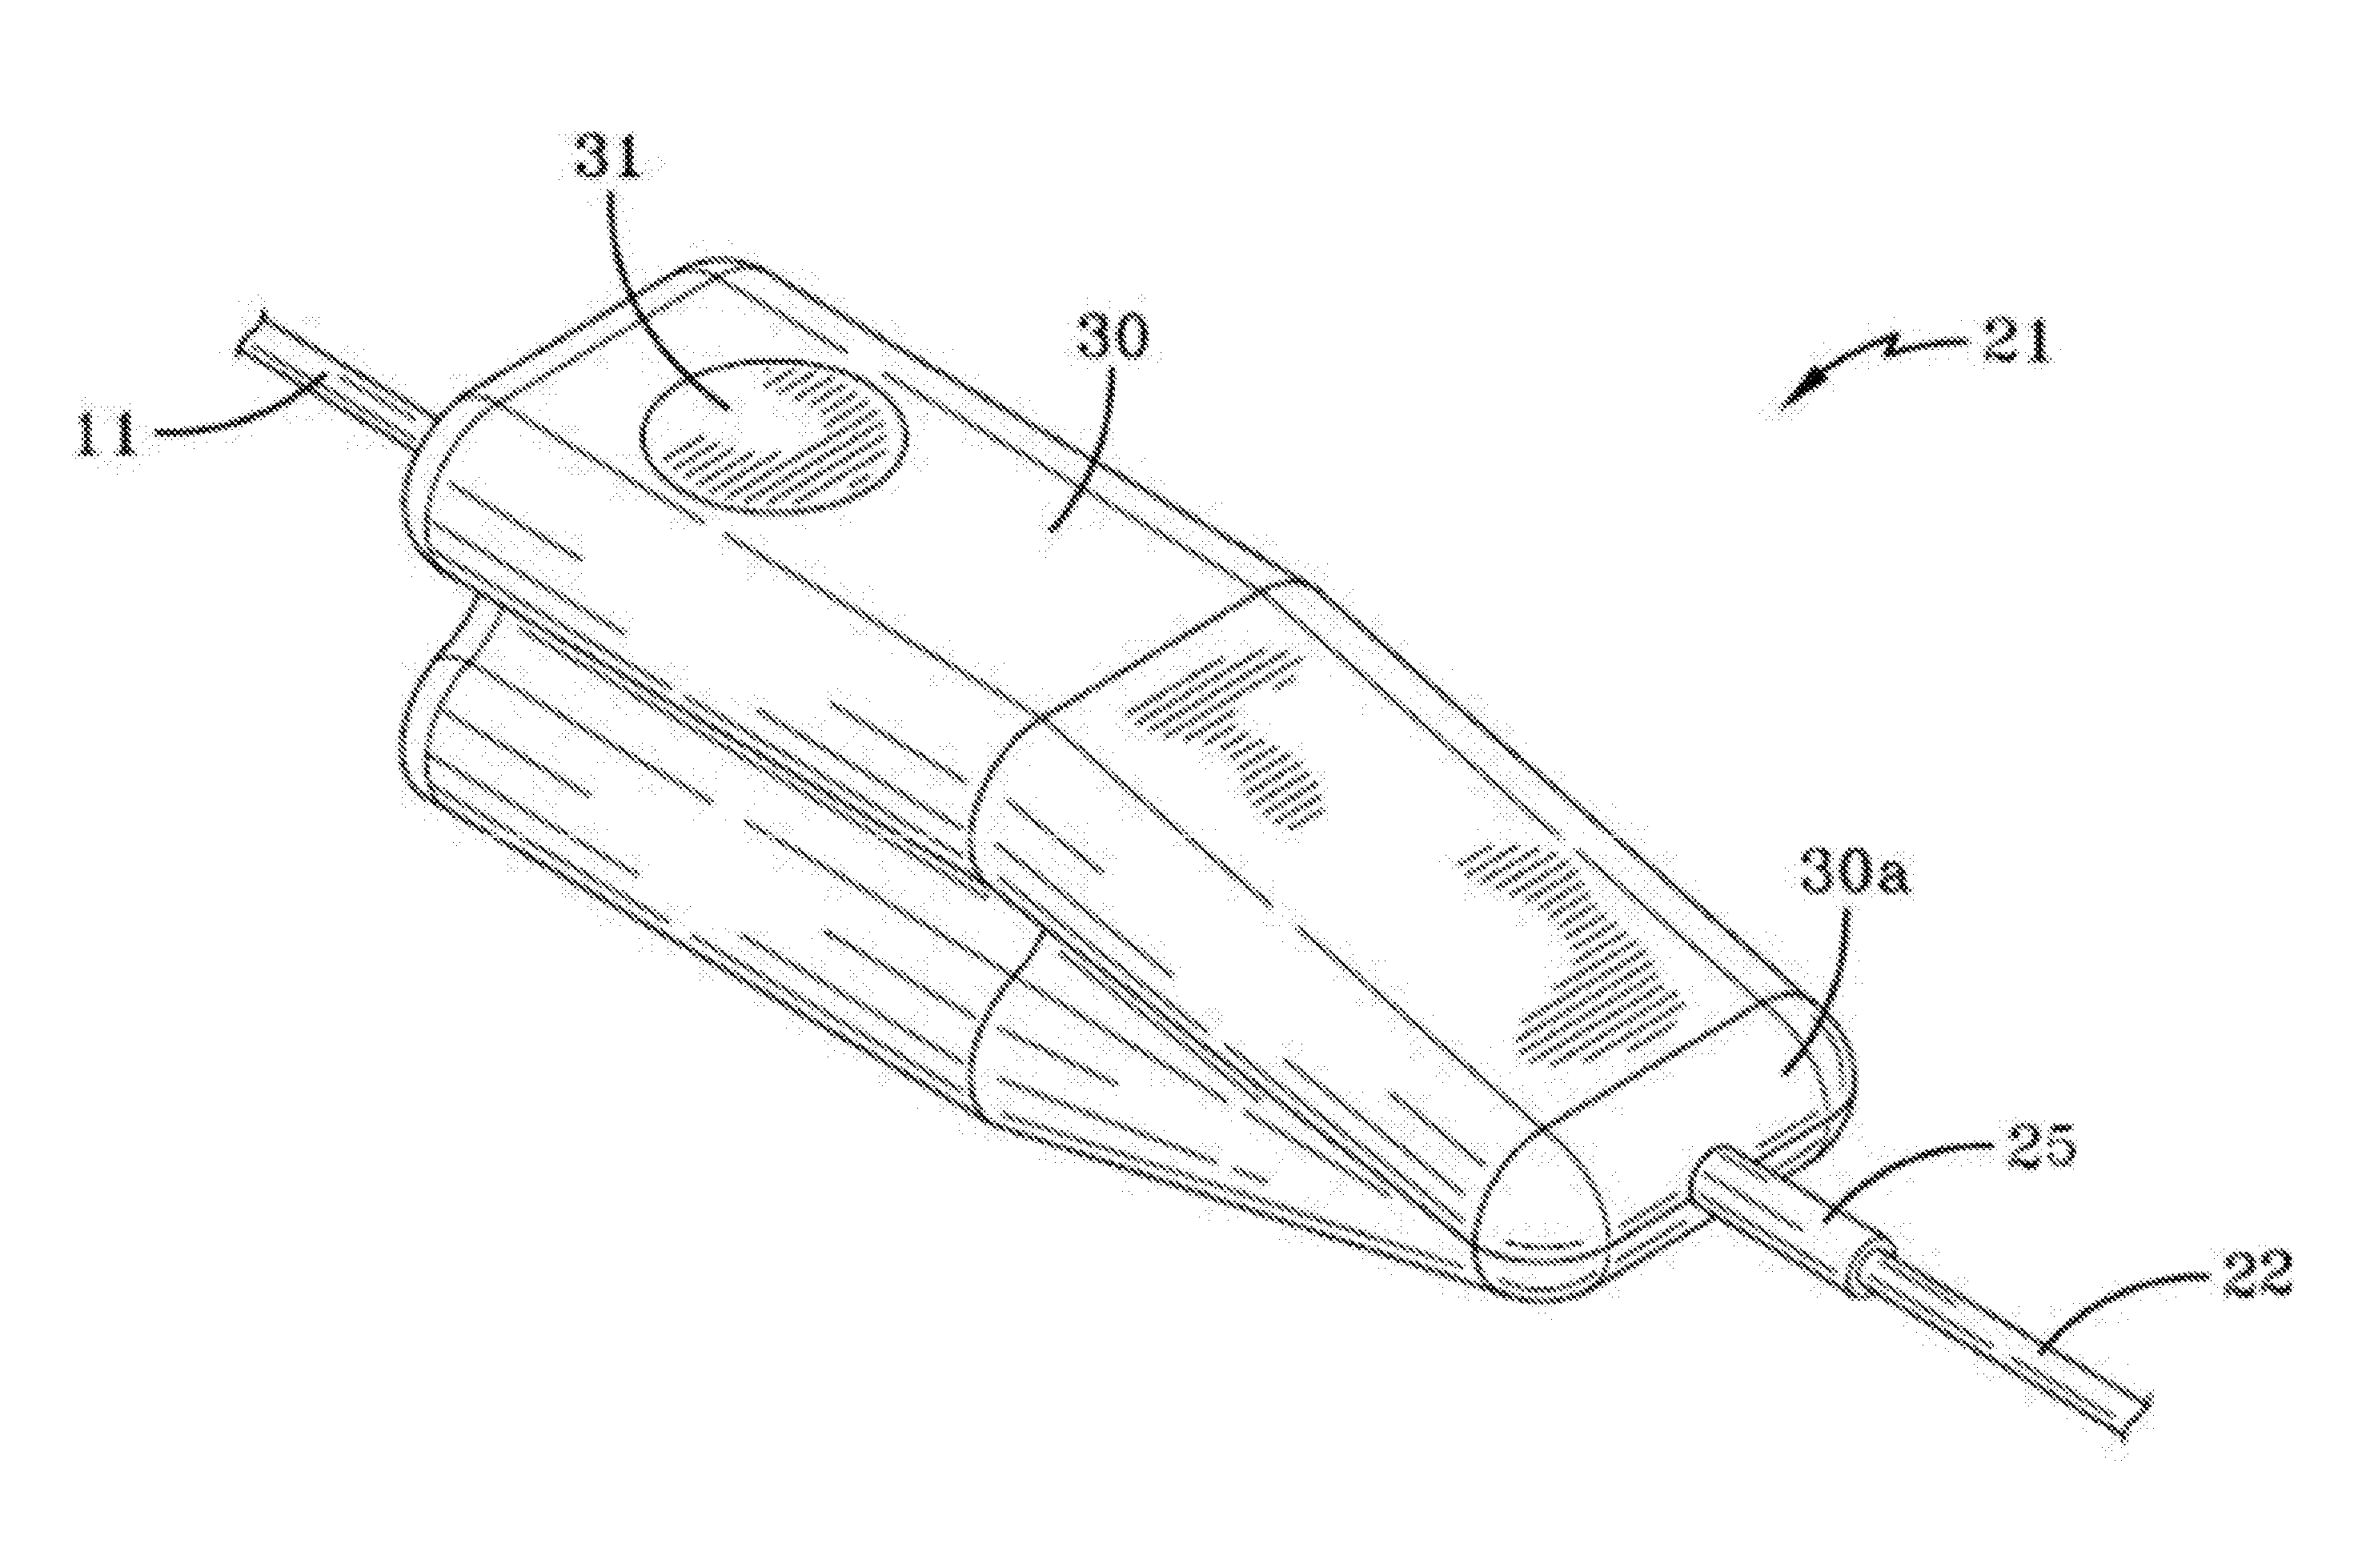 Balloon catheter having a retractable sheath and locking mechanism with balloon recapture element